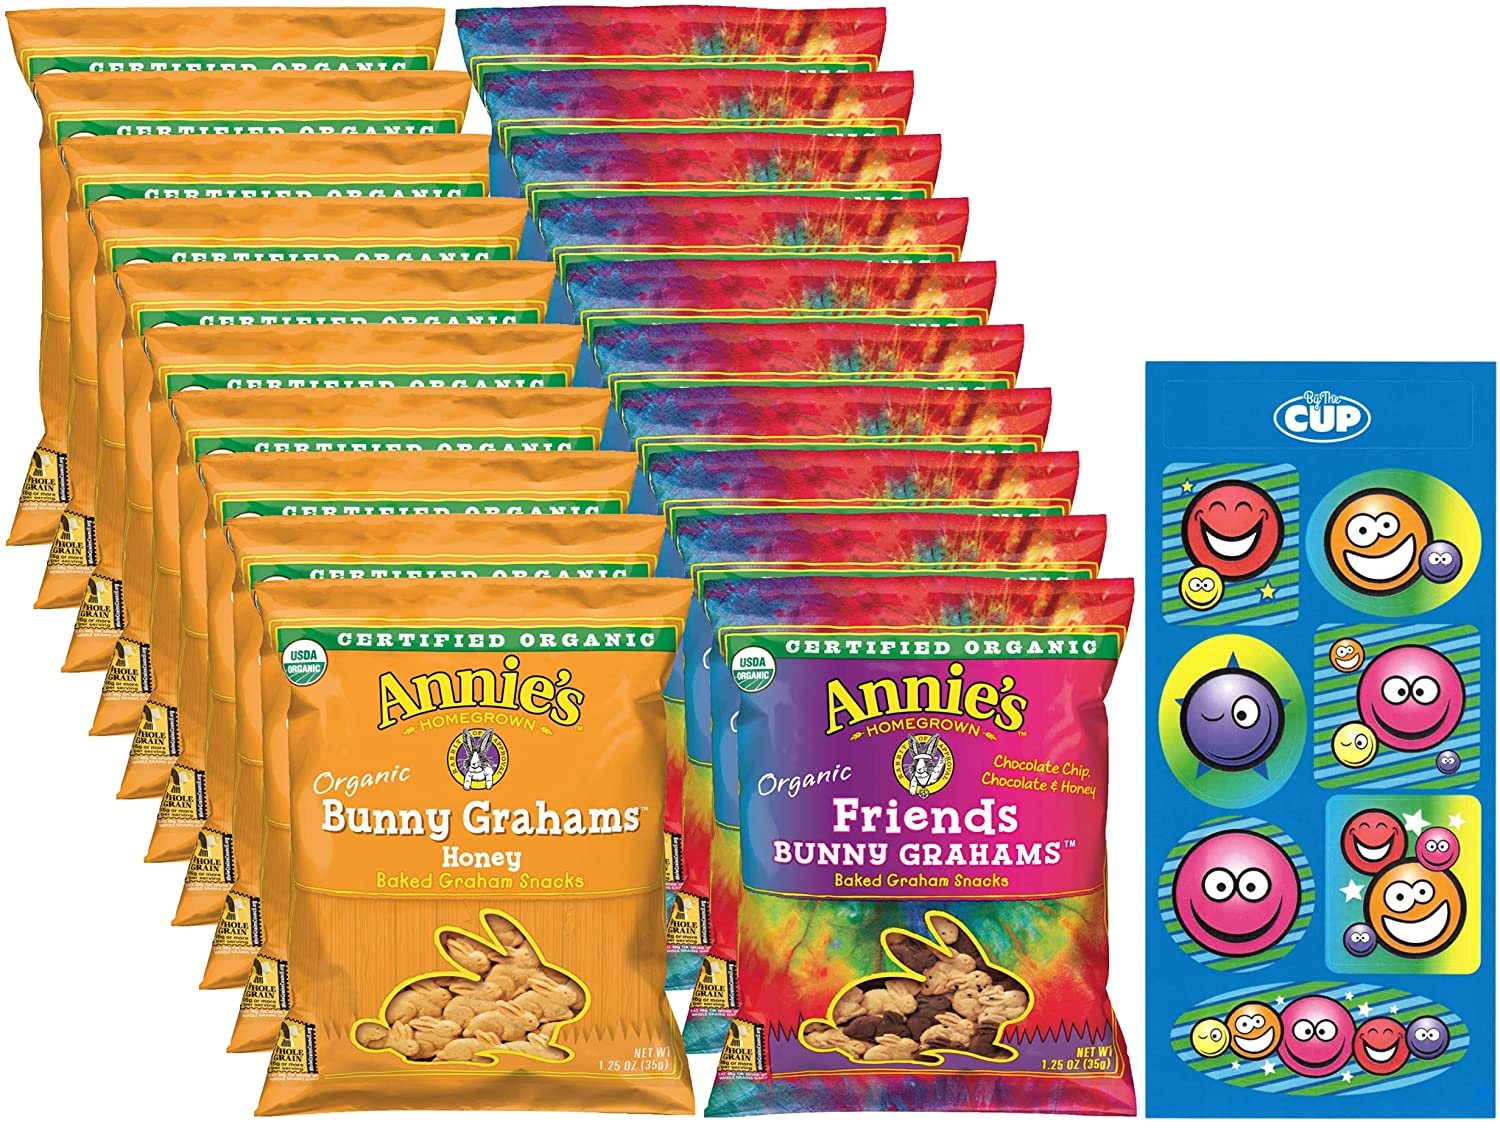 Annie's Organic Baked Graham Snacks Variety, Friends Bunny Grahams and Honey Bunny Grahams (Pack of 20) with By The Cup Stickers